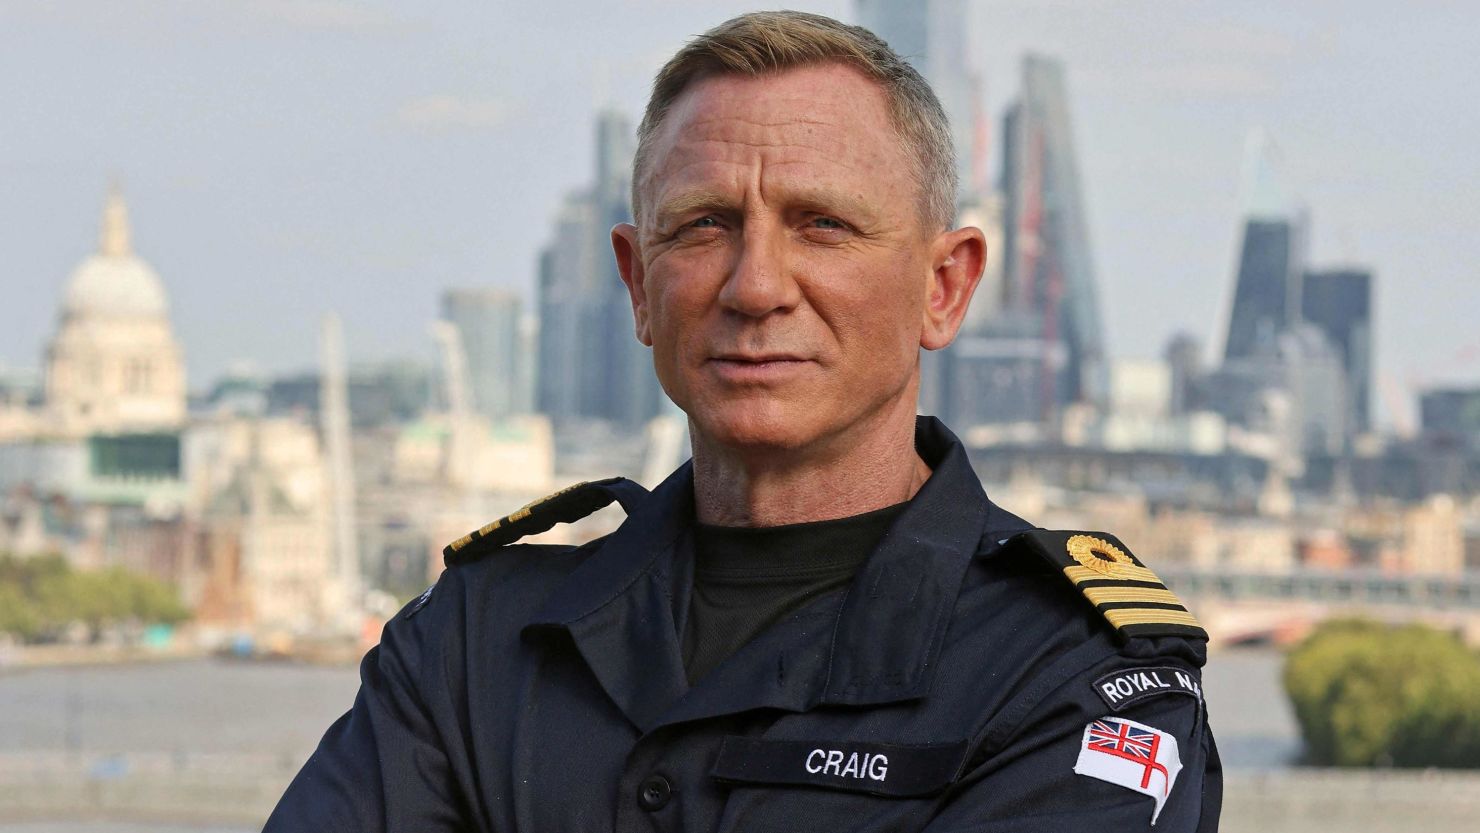 The British Royal Navy shows off its newest honorary officer, "James Bond" star Daniel Craig, at a ceremony in London this week.